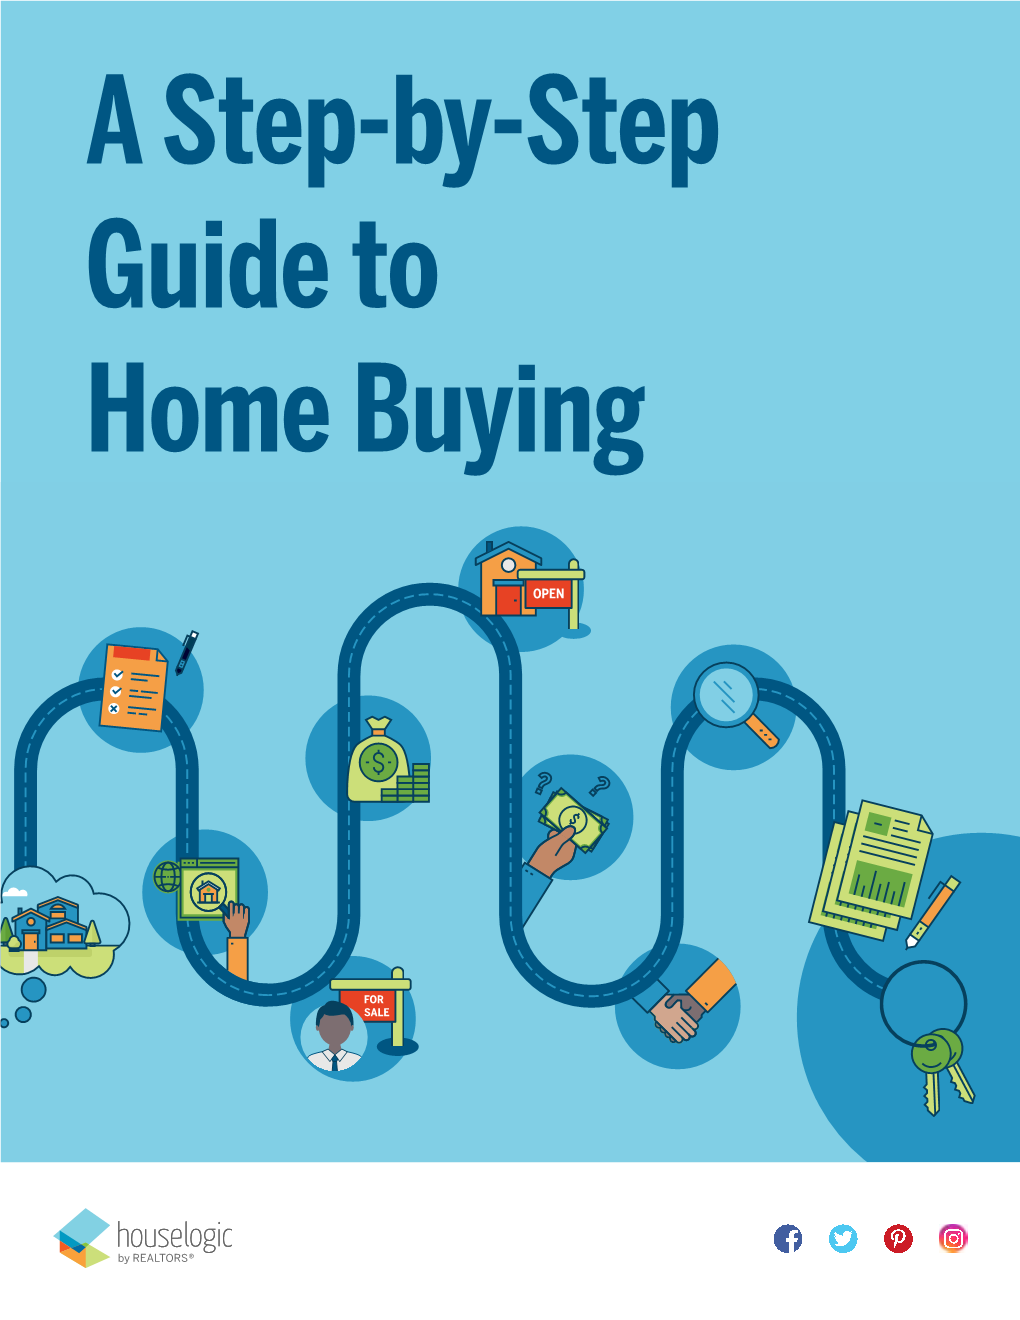 Home BUYING Guide